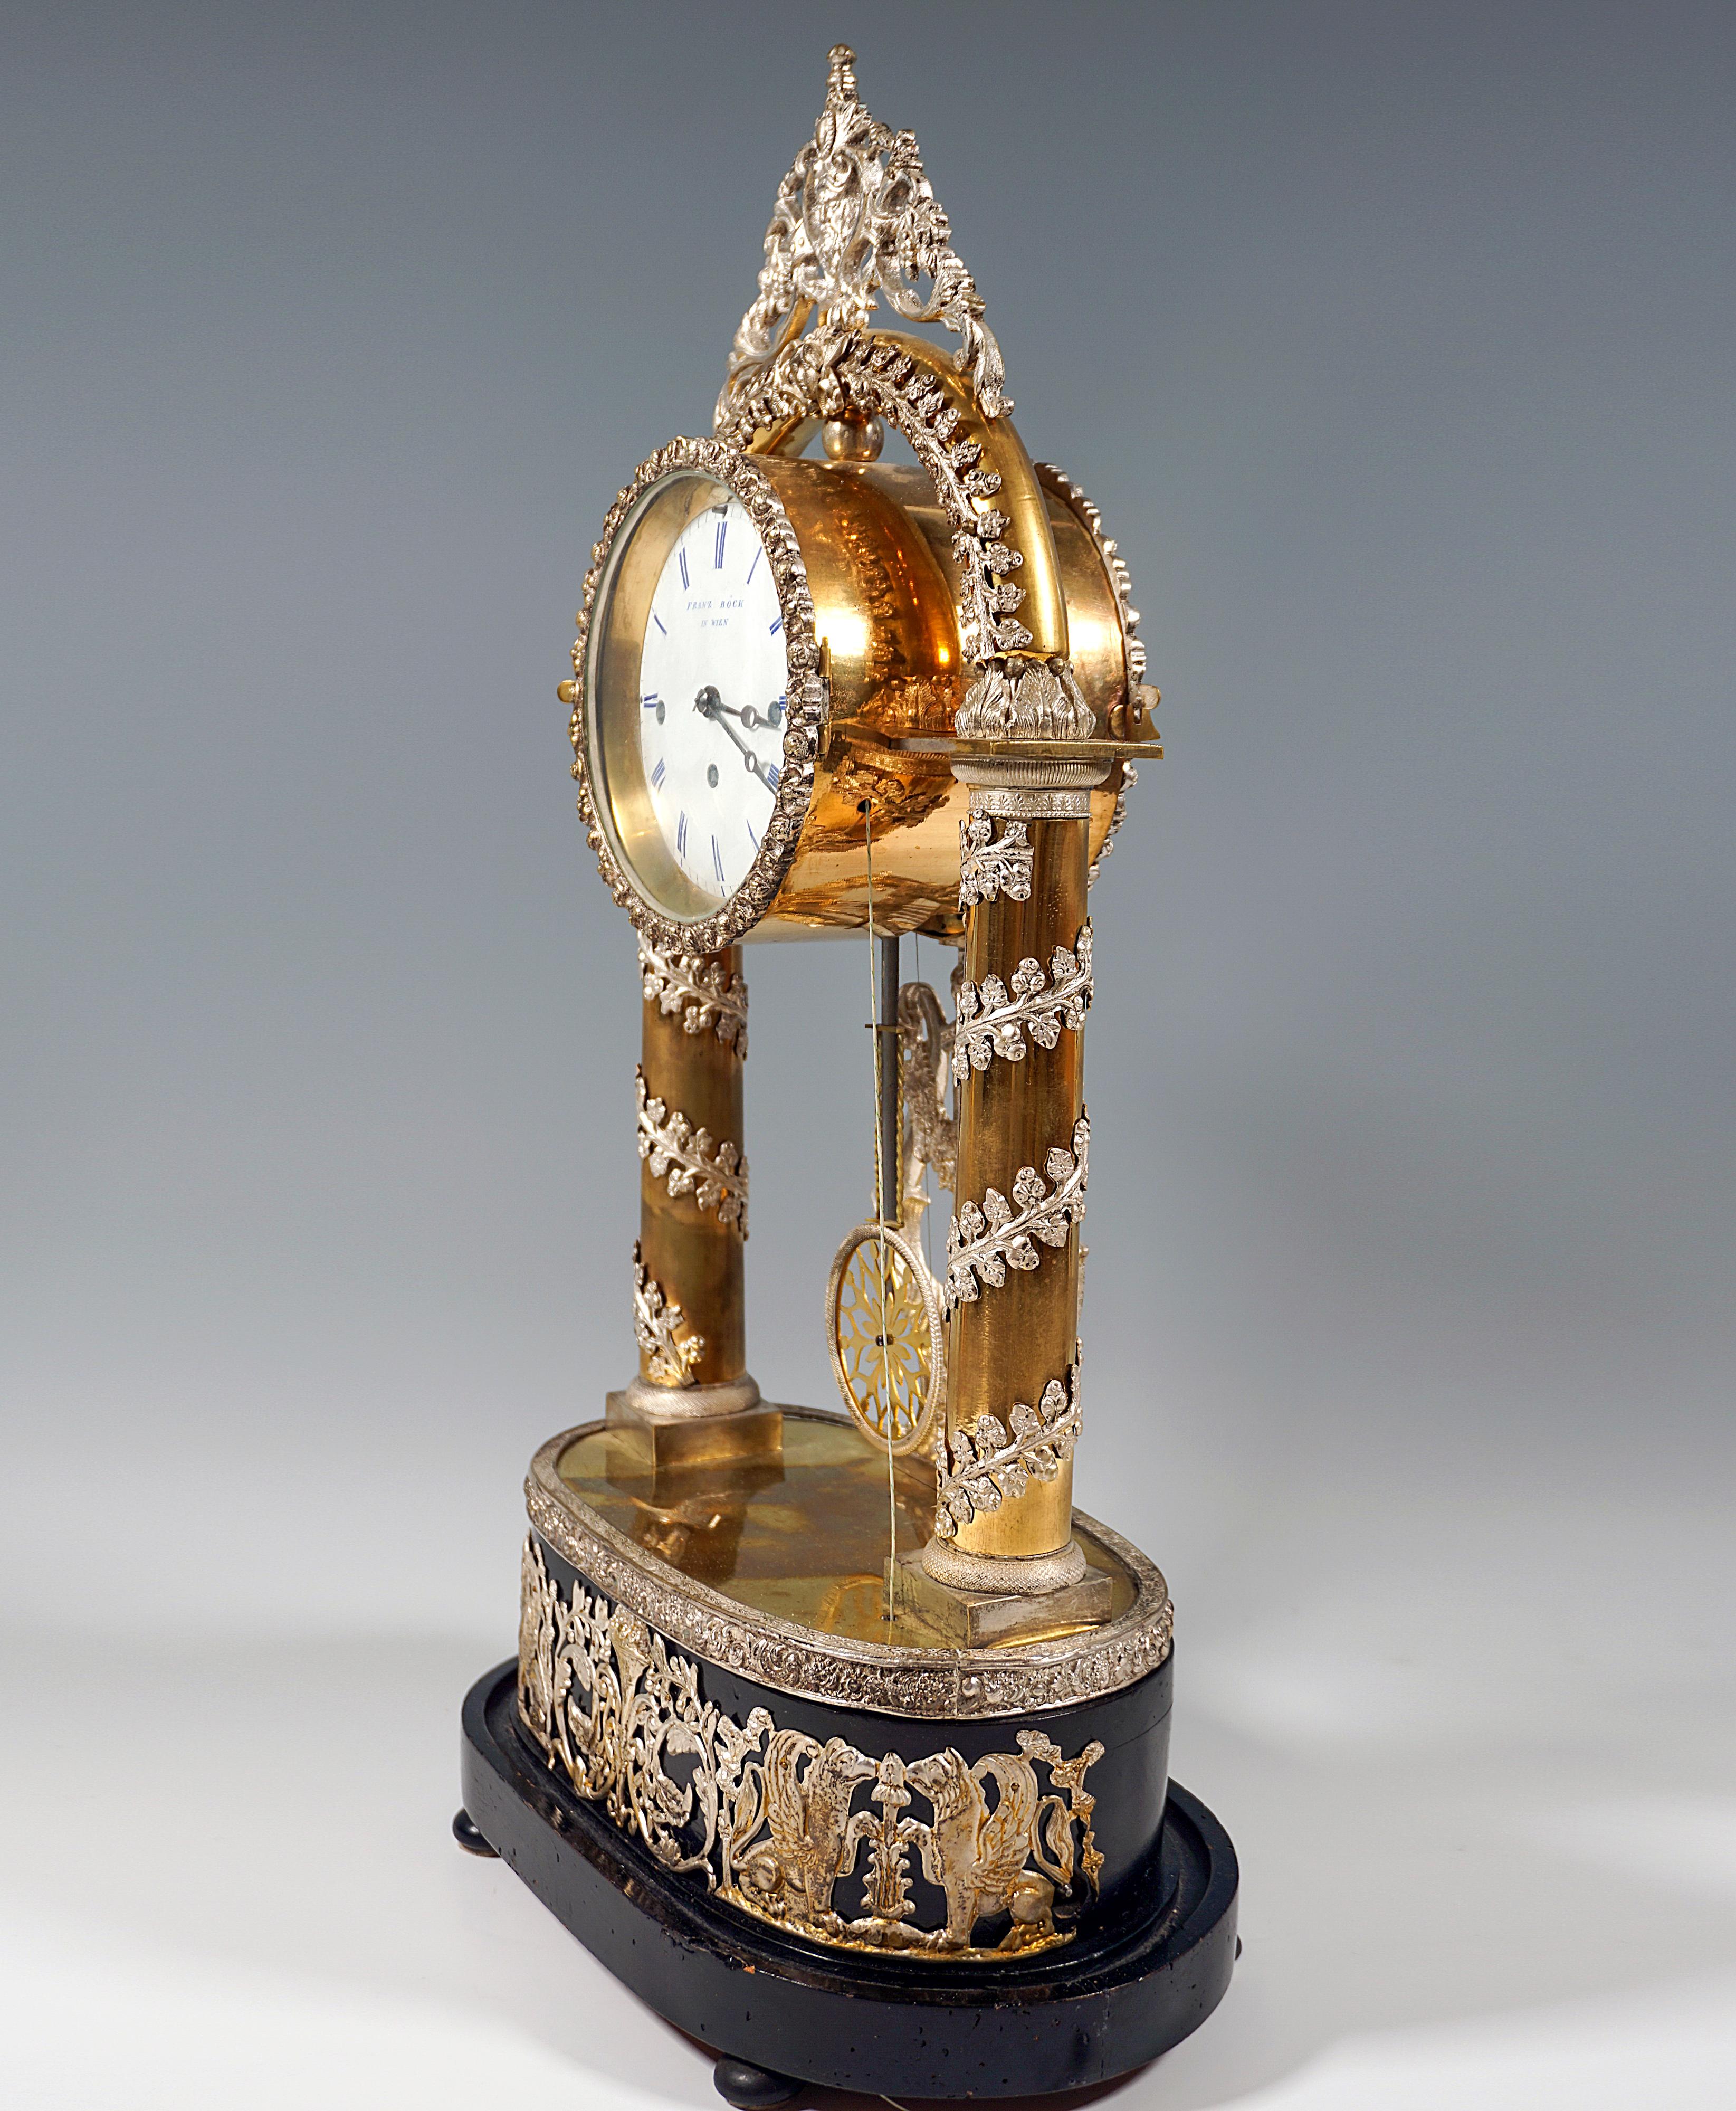 Hand-Crafted Viennese Biedermeier Anniversary Clock With Musical Movement, Boeck & Olbrich